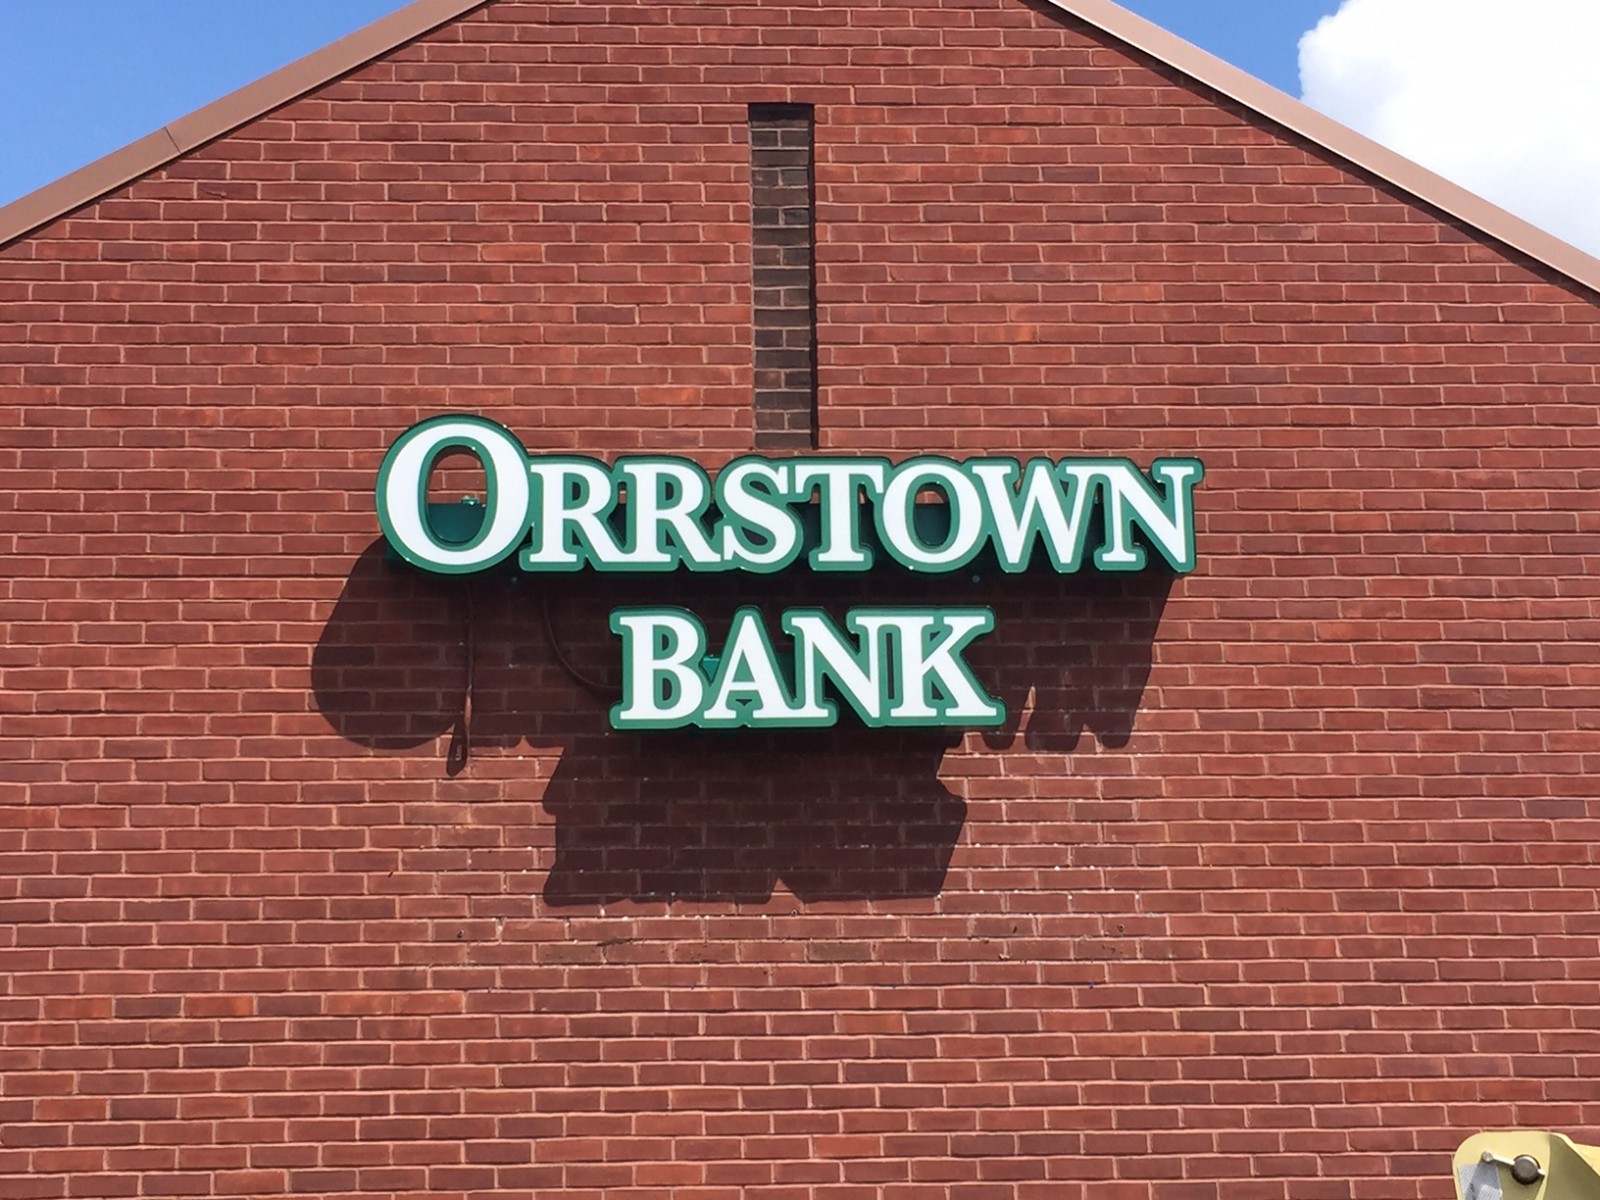 Orrstown_bank1